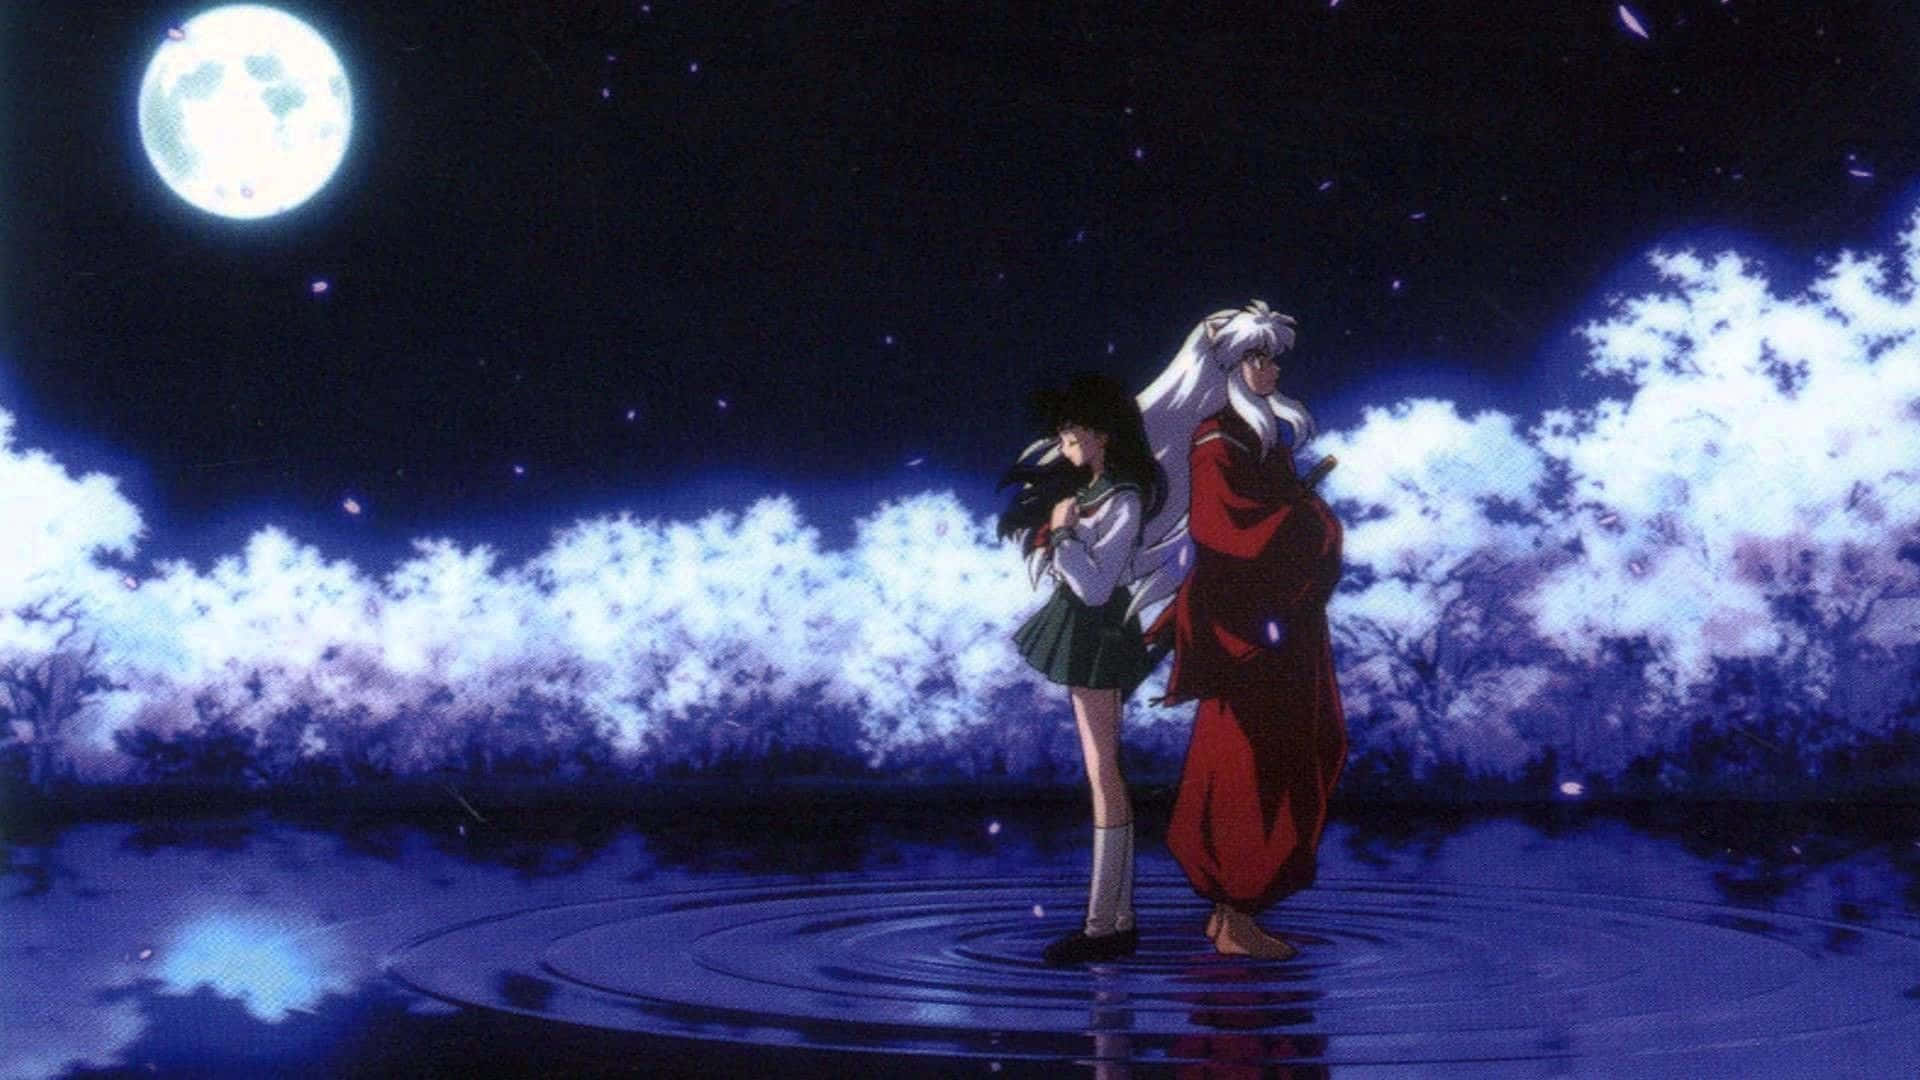 Step into an anime adventure with "Inuyasha" Wallpaper